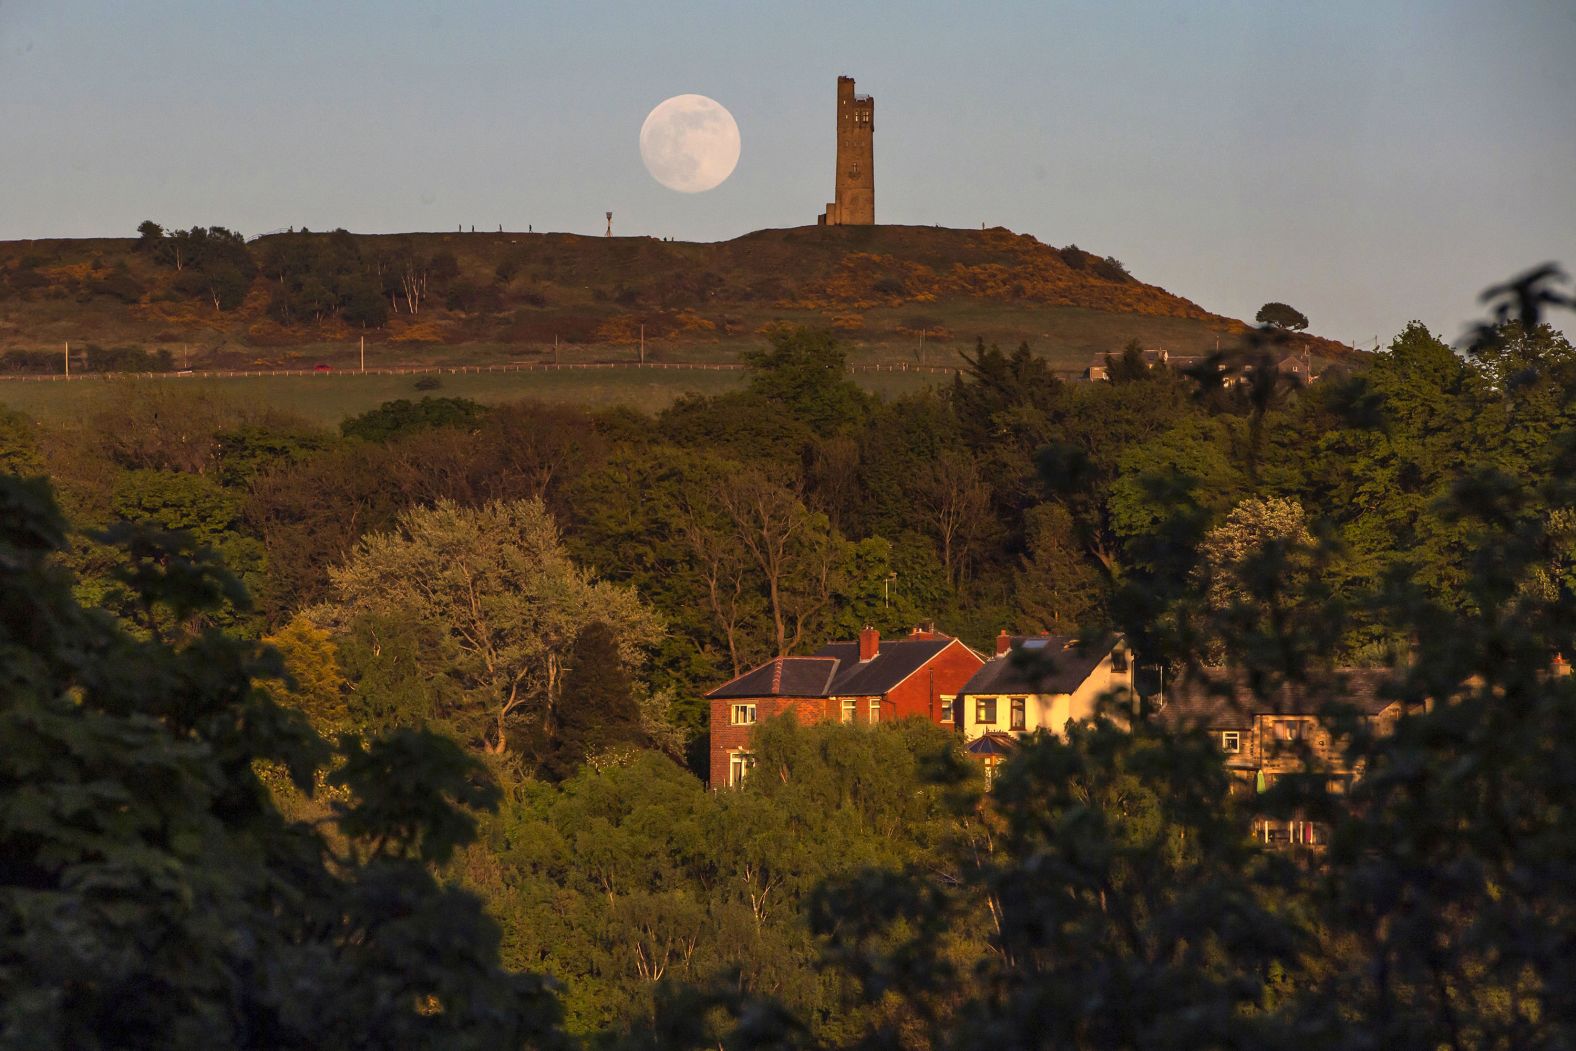 The moon rises behind Victoria Tower in Huddersfield, England.